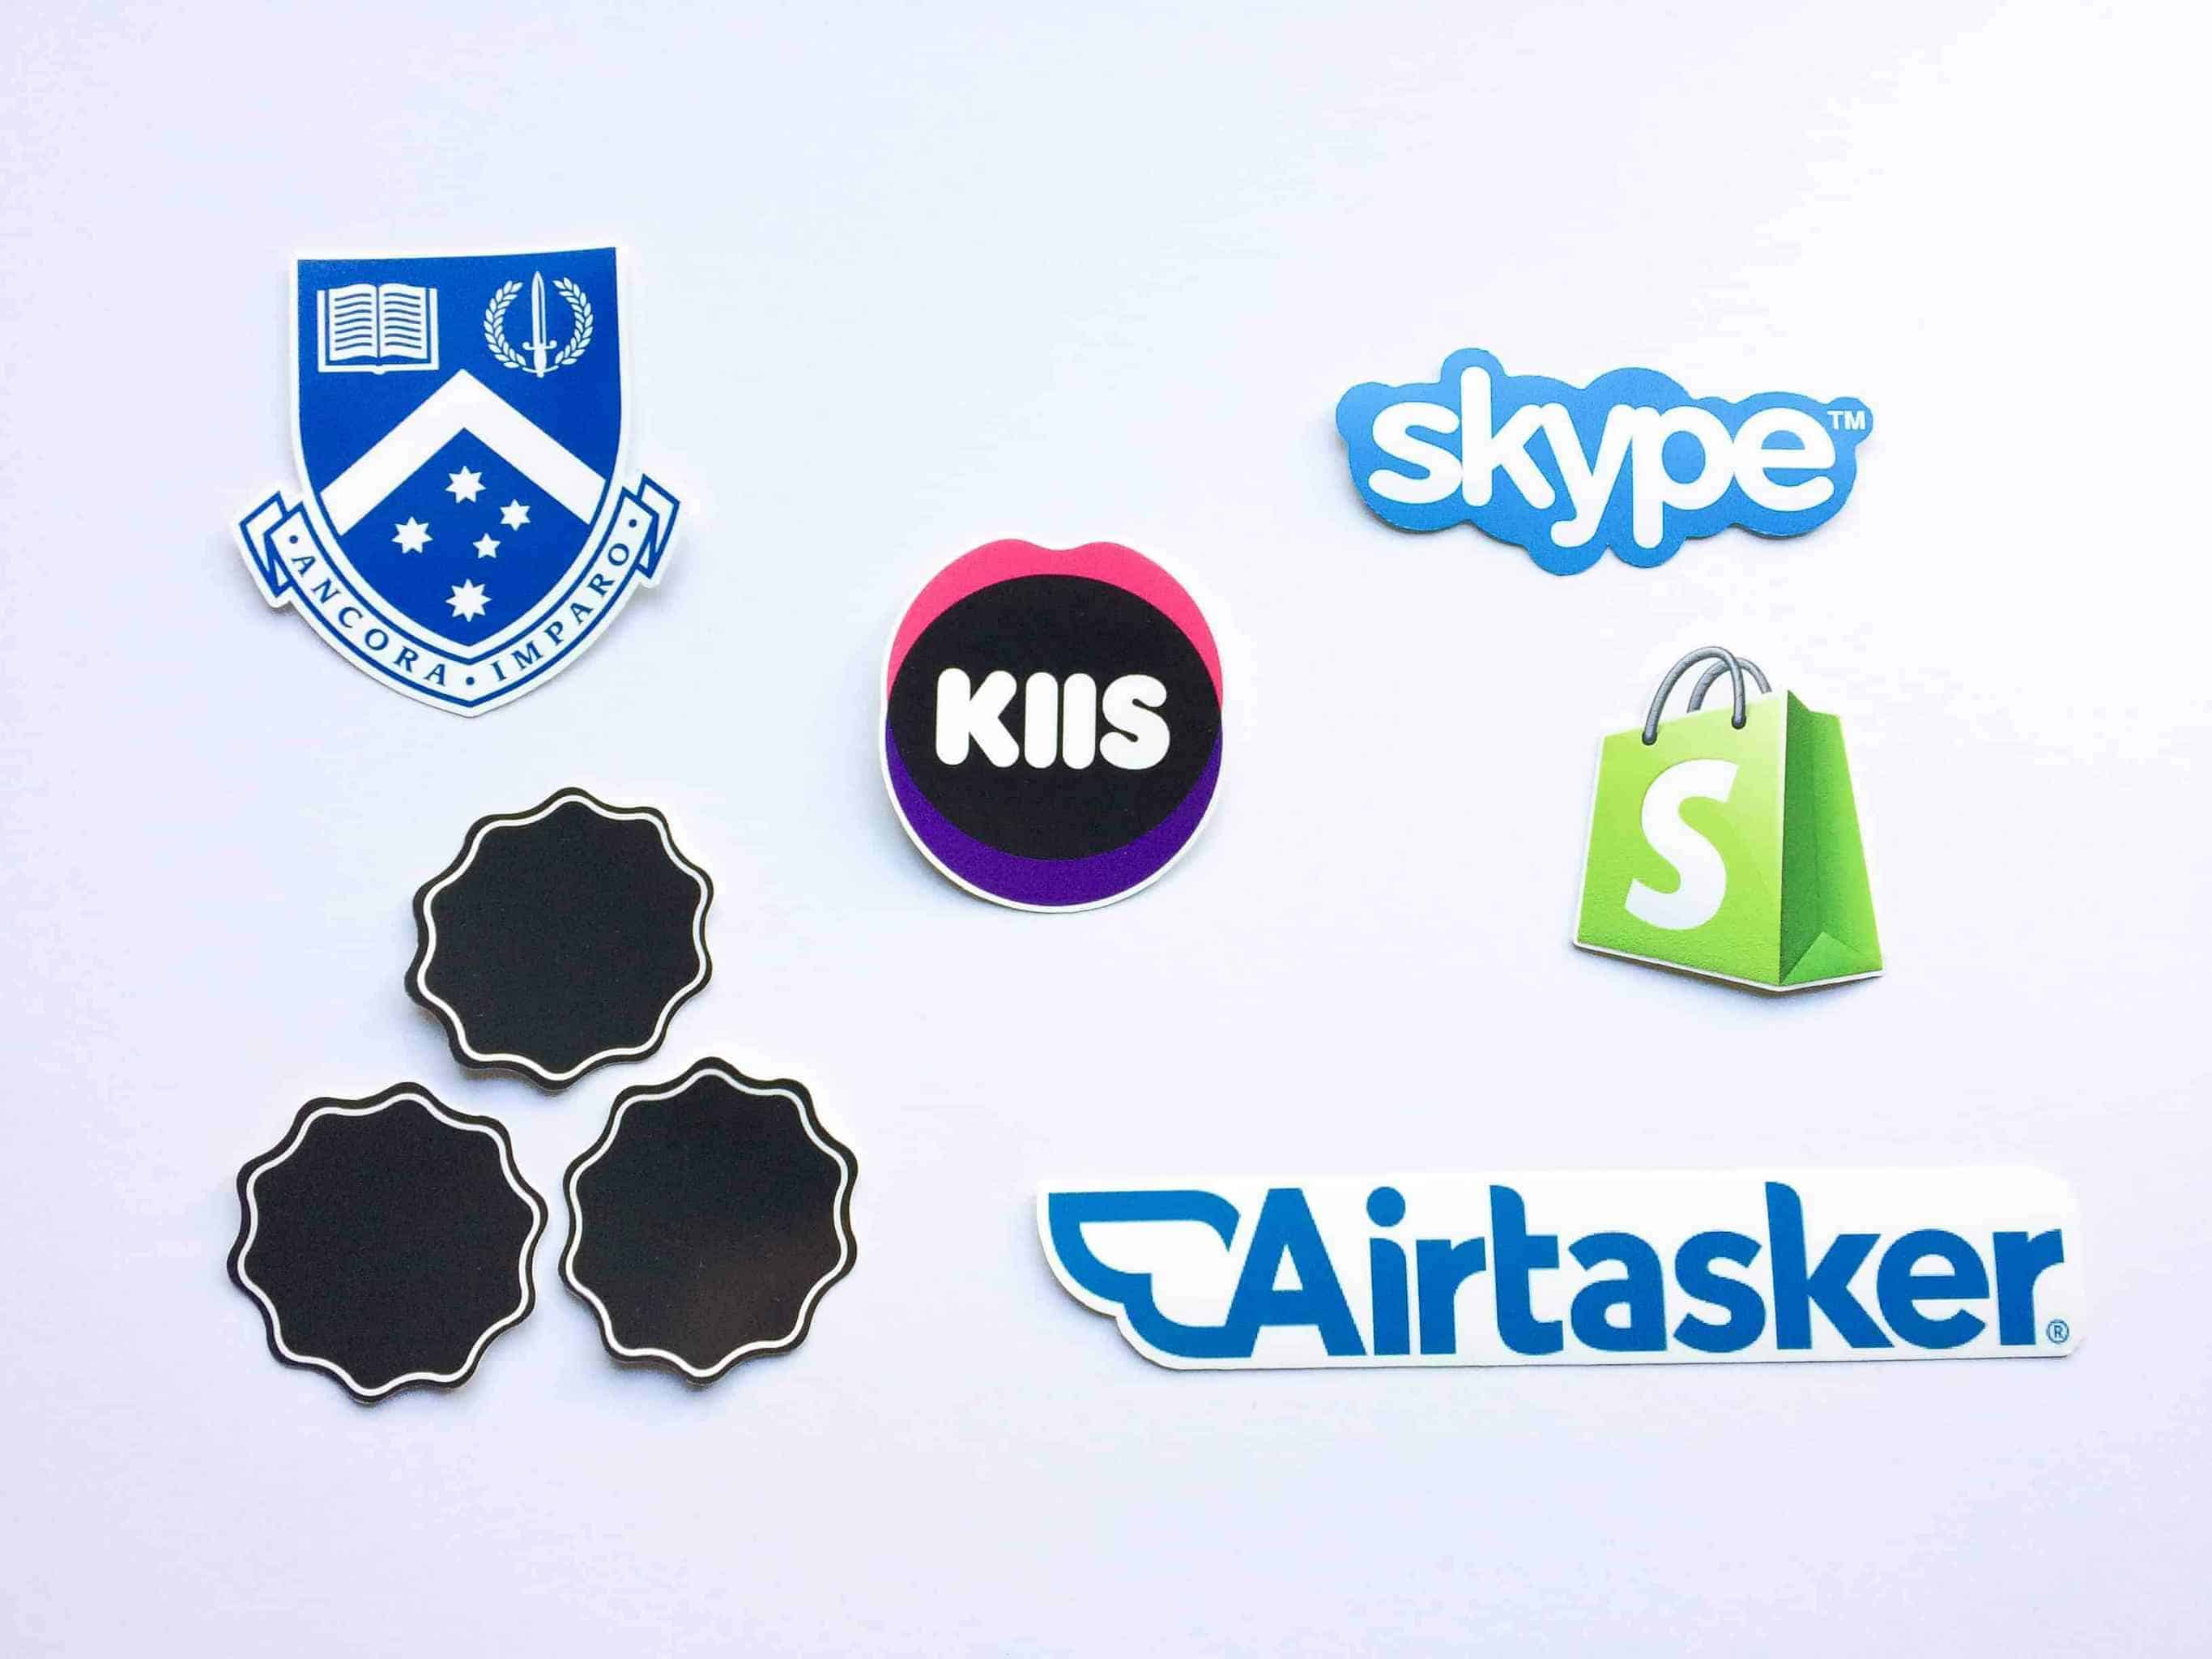 Custom Die Cut Stickers are great to hand out at university clubs and groups, radio stations, expos and events